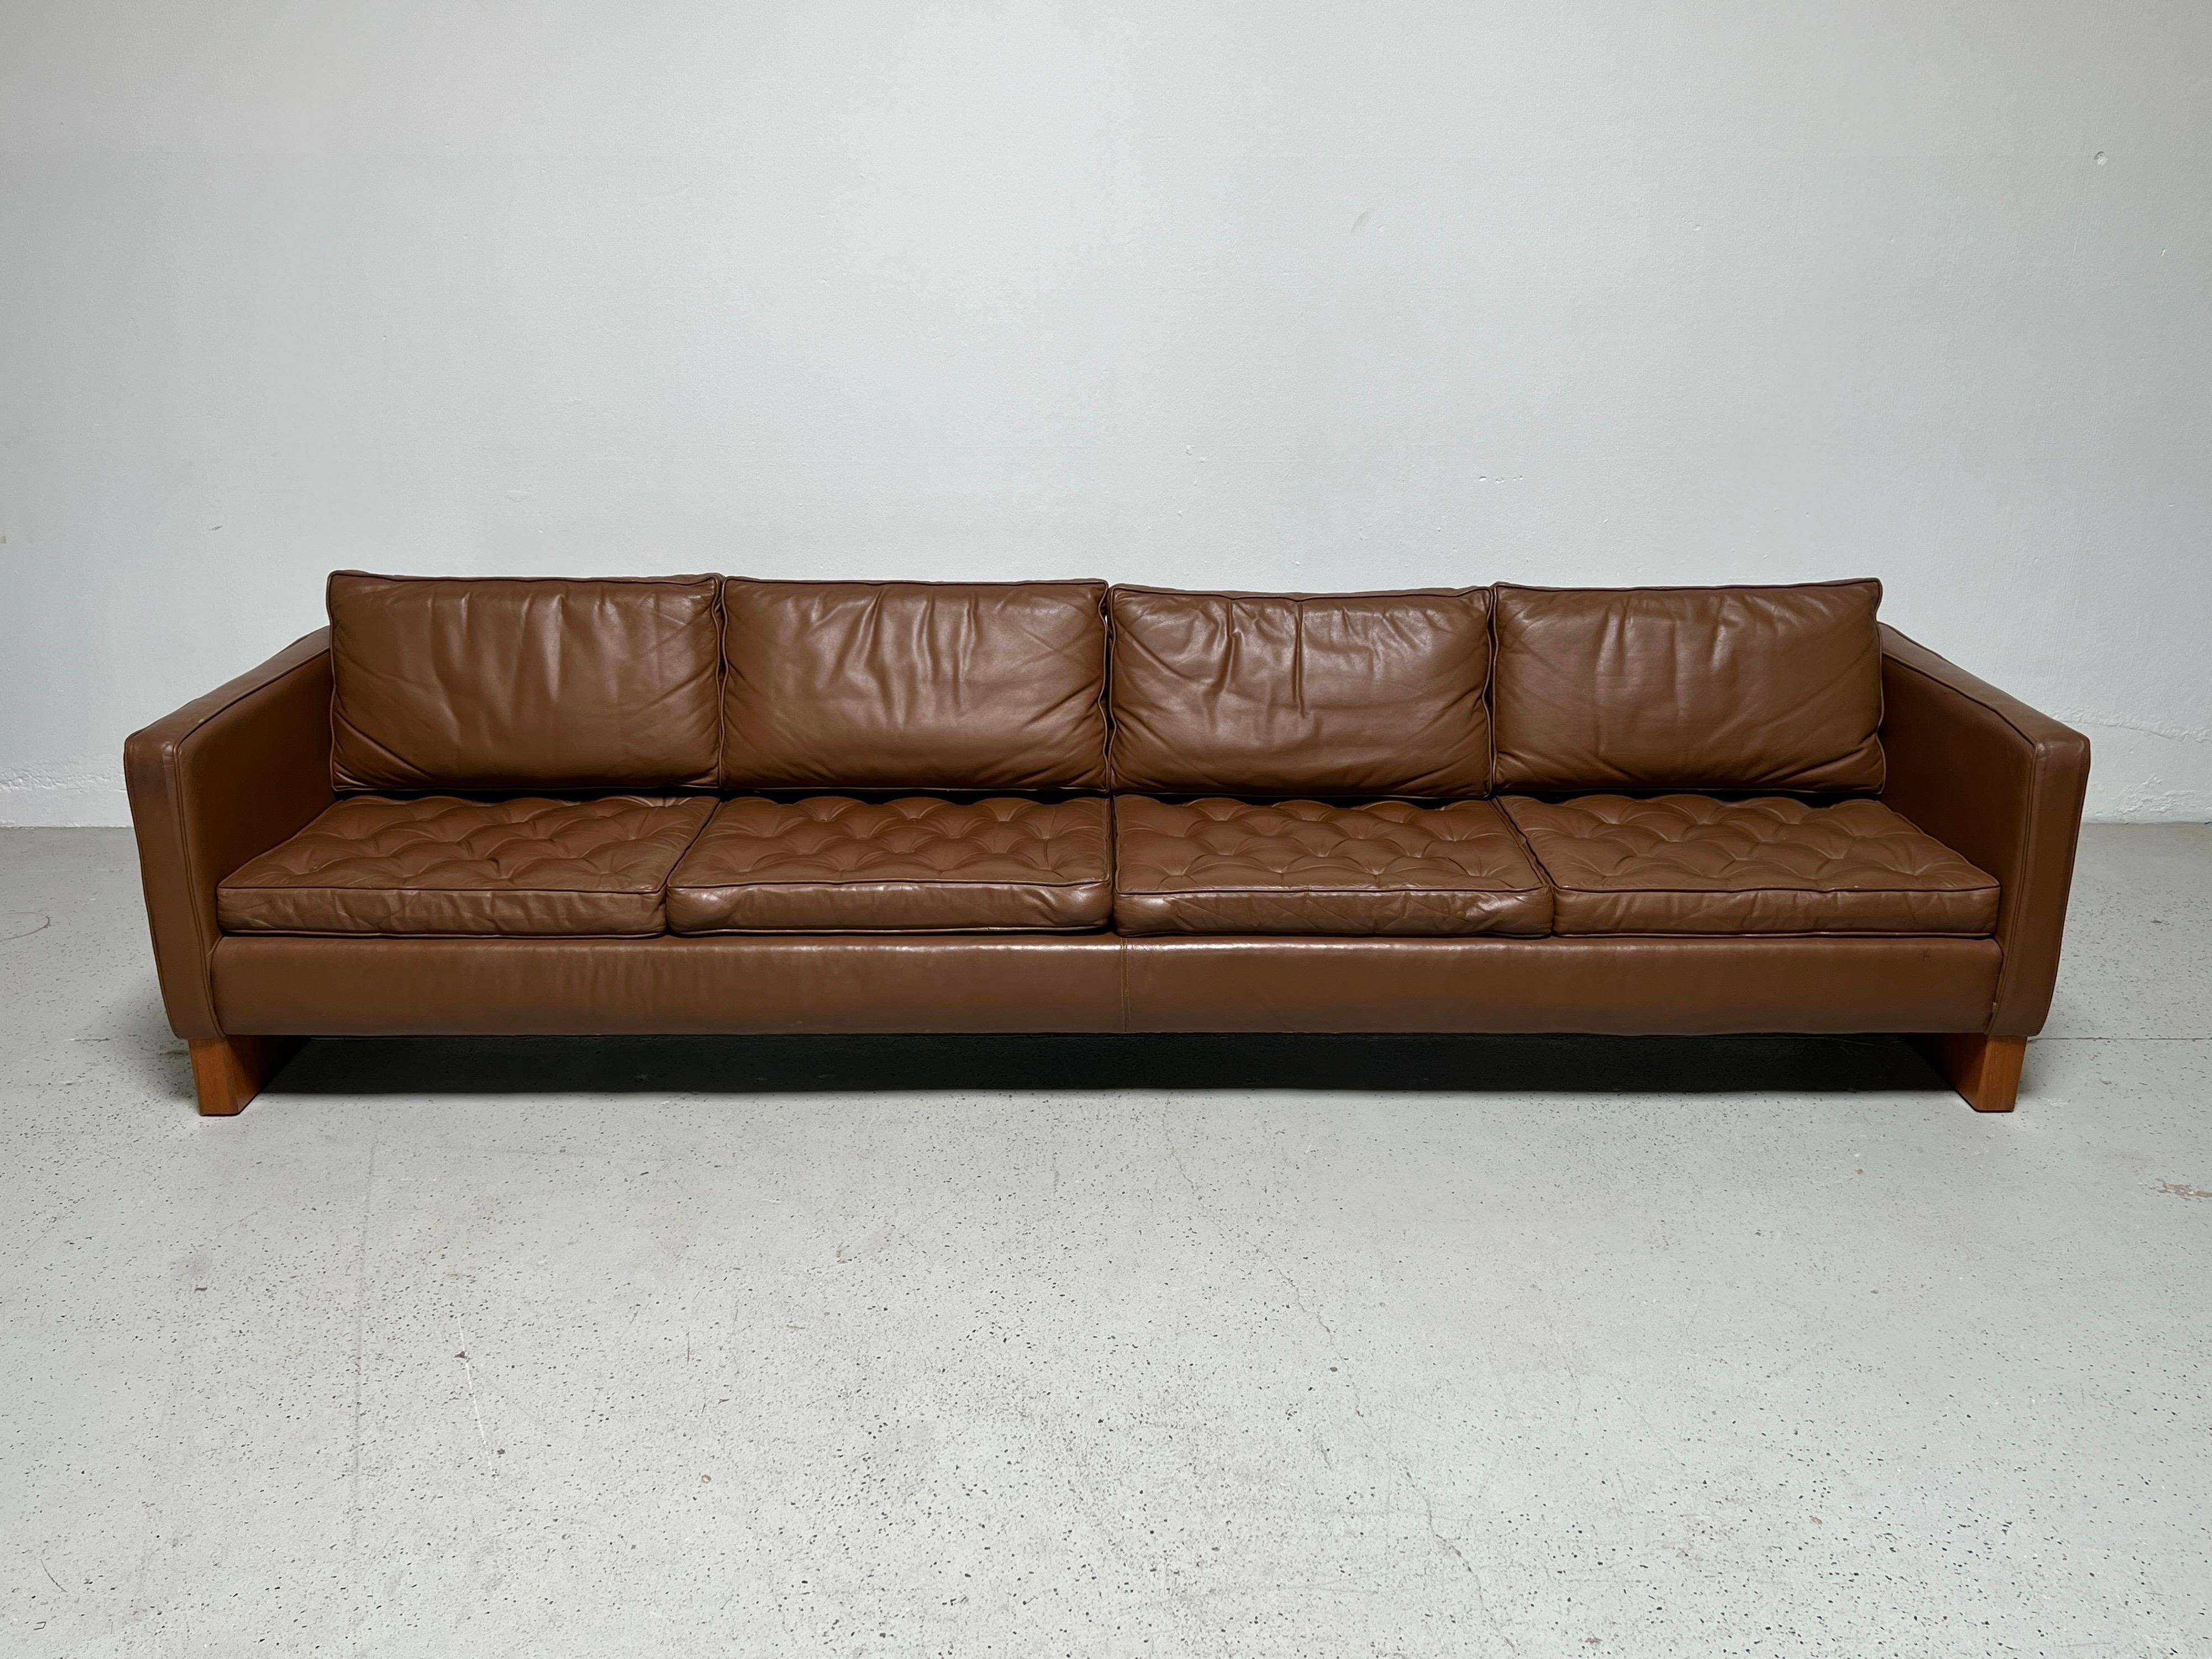 A large four seater sofa designed by Mies van den Rohe for Knoll. A rare design made in limited production. This version with oak runners and newer leather upholstery.